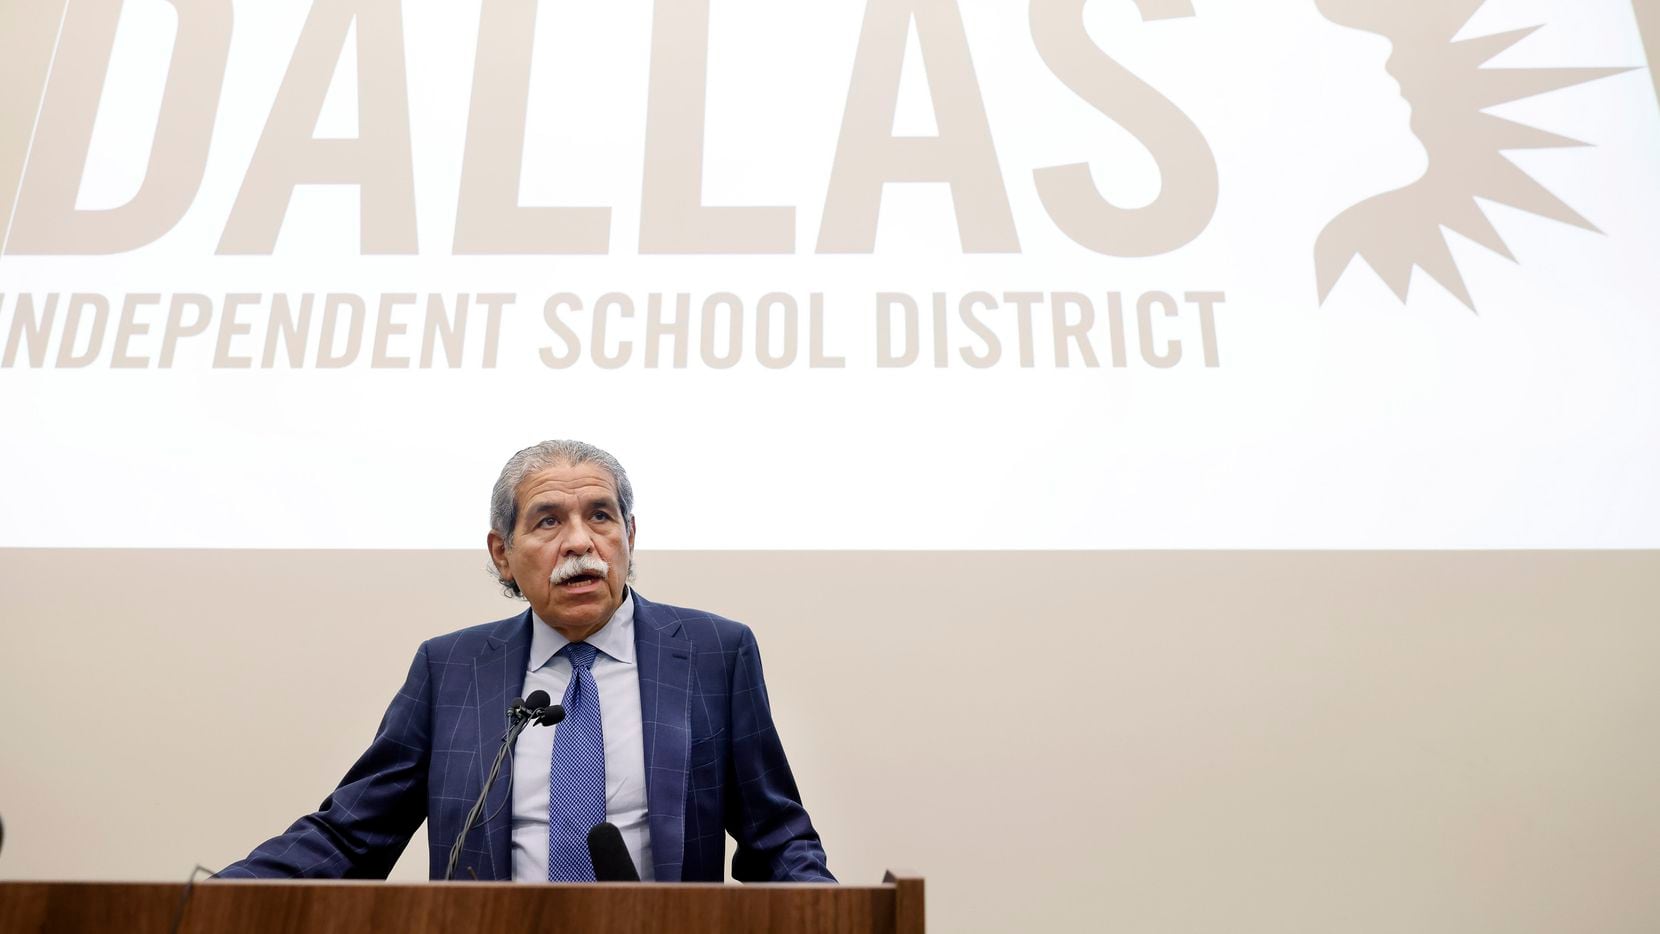 Dallas ISD Superintendent Michael Hinojosa, who has led the district for a decade, has been...